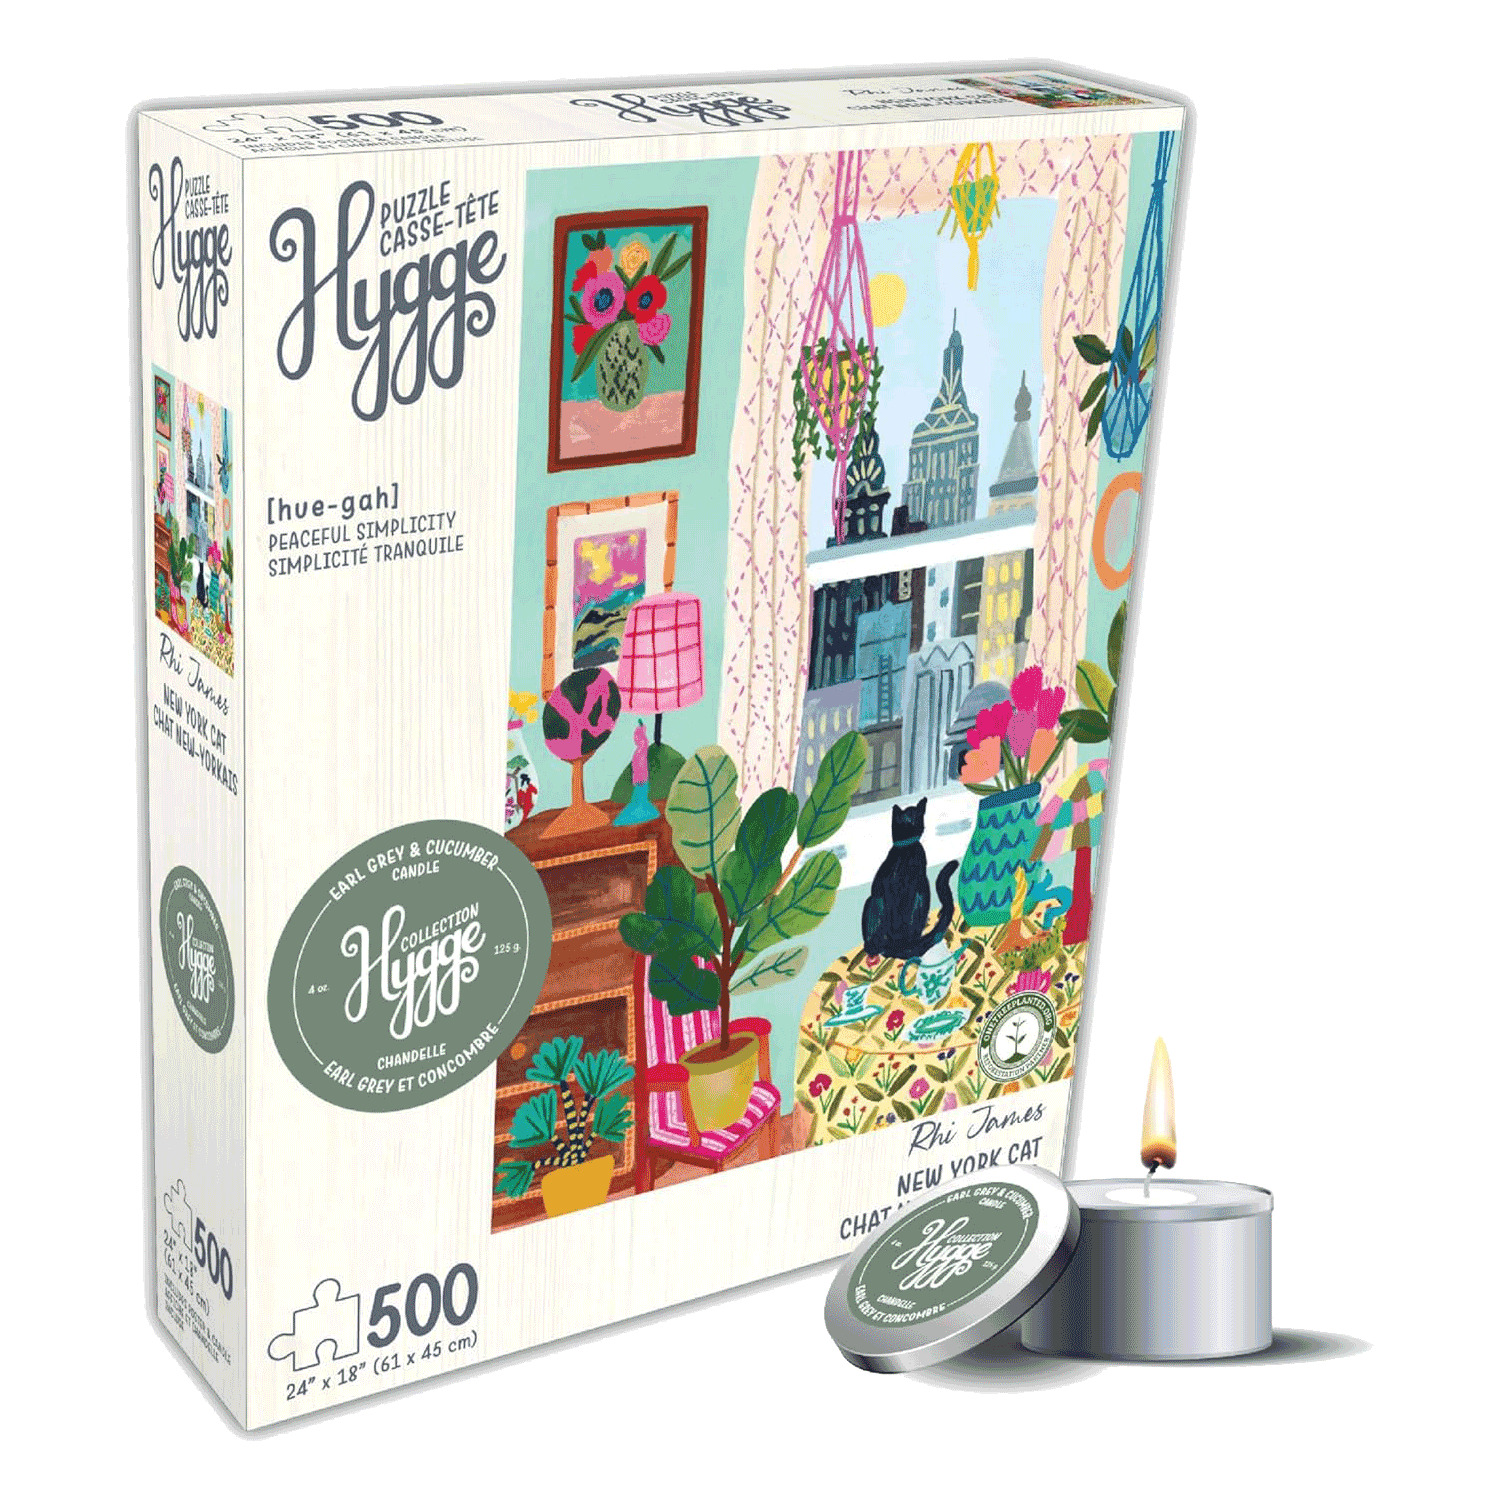 Playview - Puzzle with candle - Rhi James - New York Cat, 500 pcs